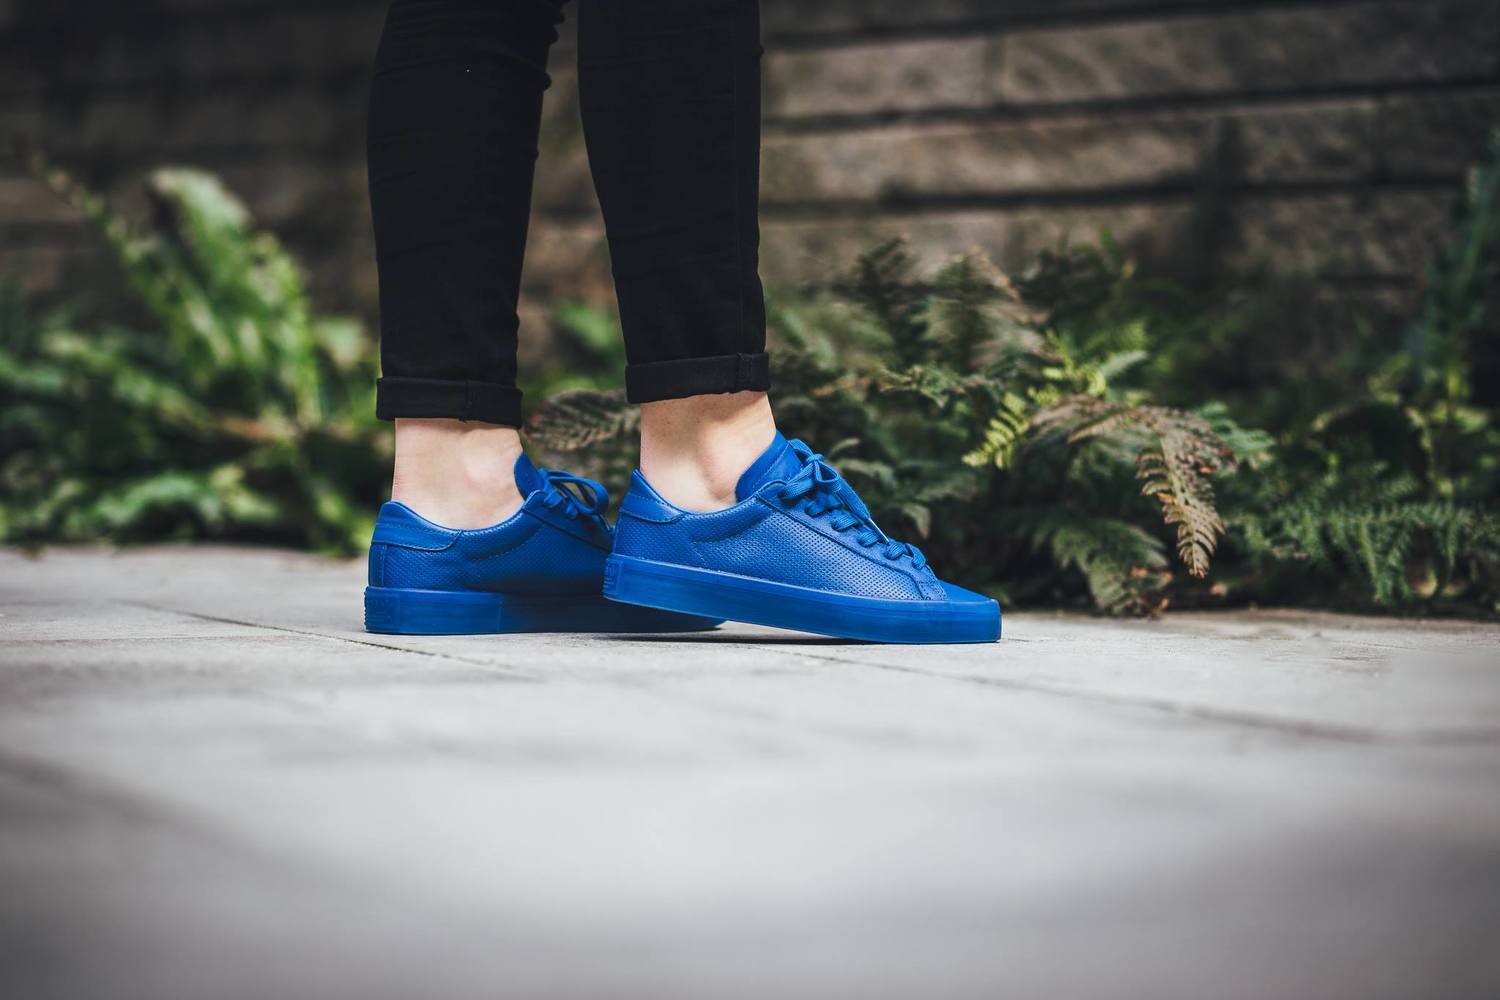 List: Adidas The Color With This Court Vantage CNK Daily (ChicksNKicks)